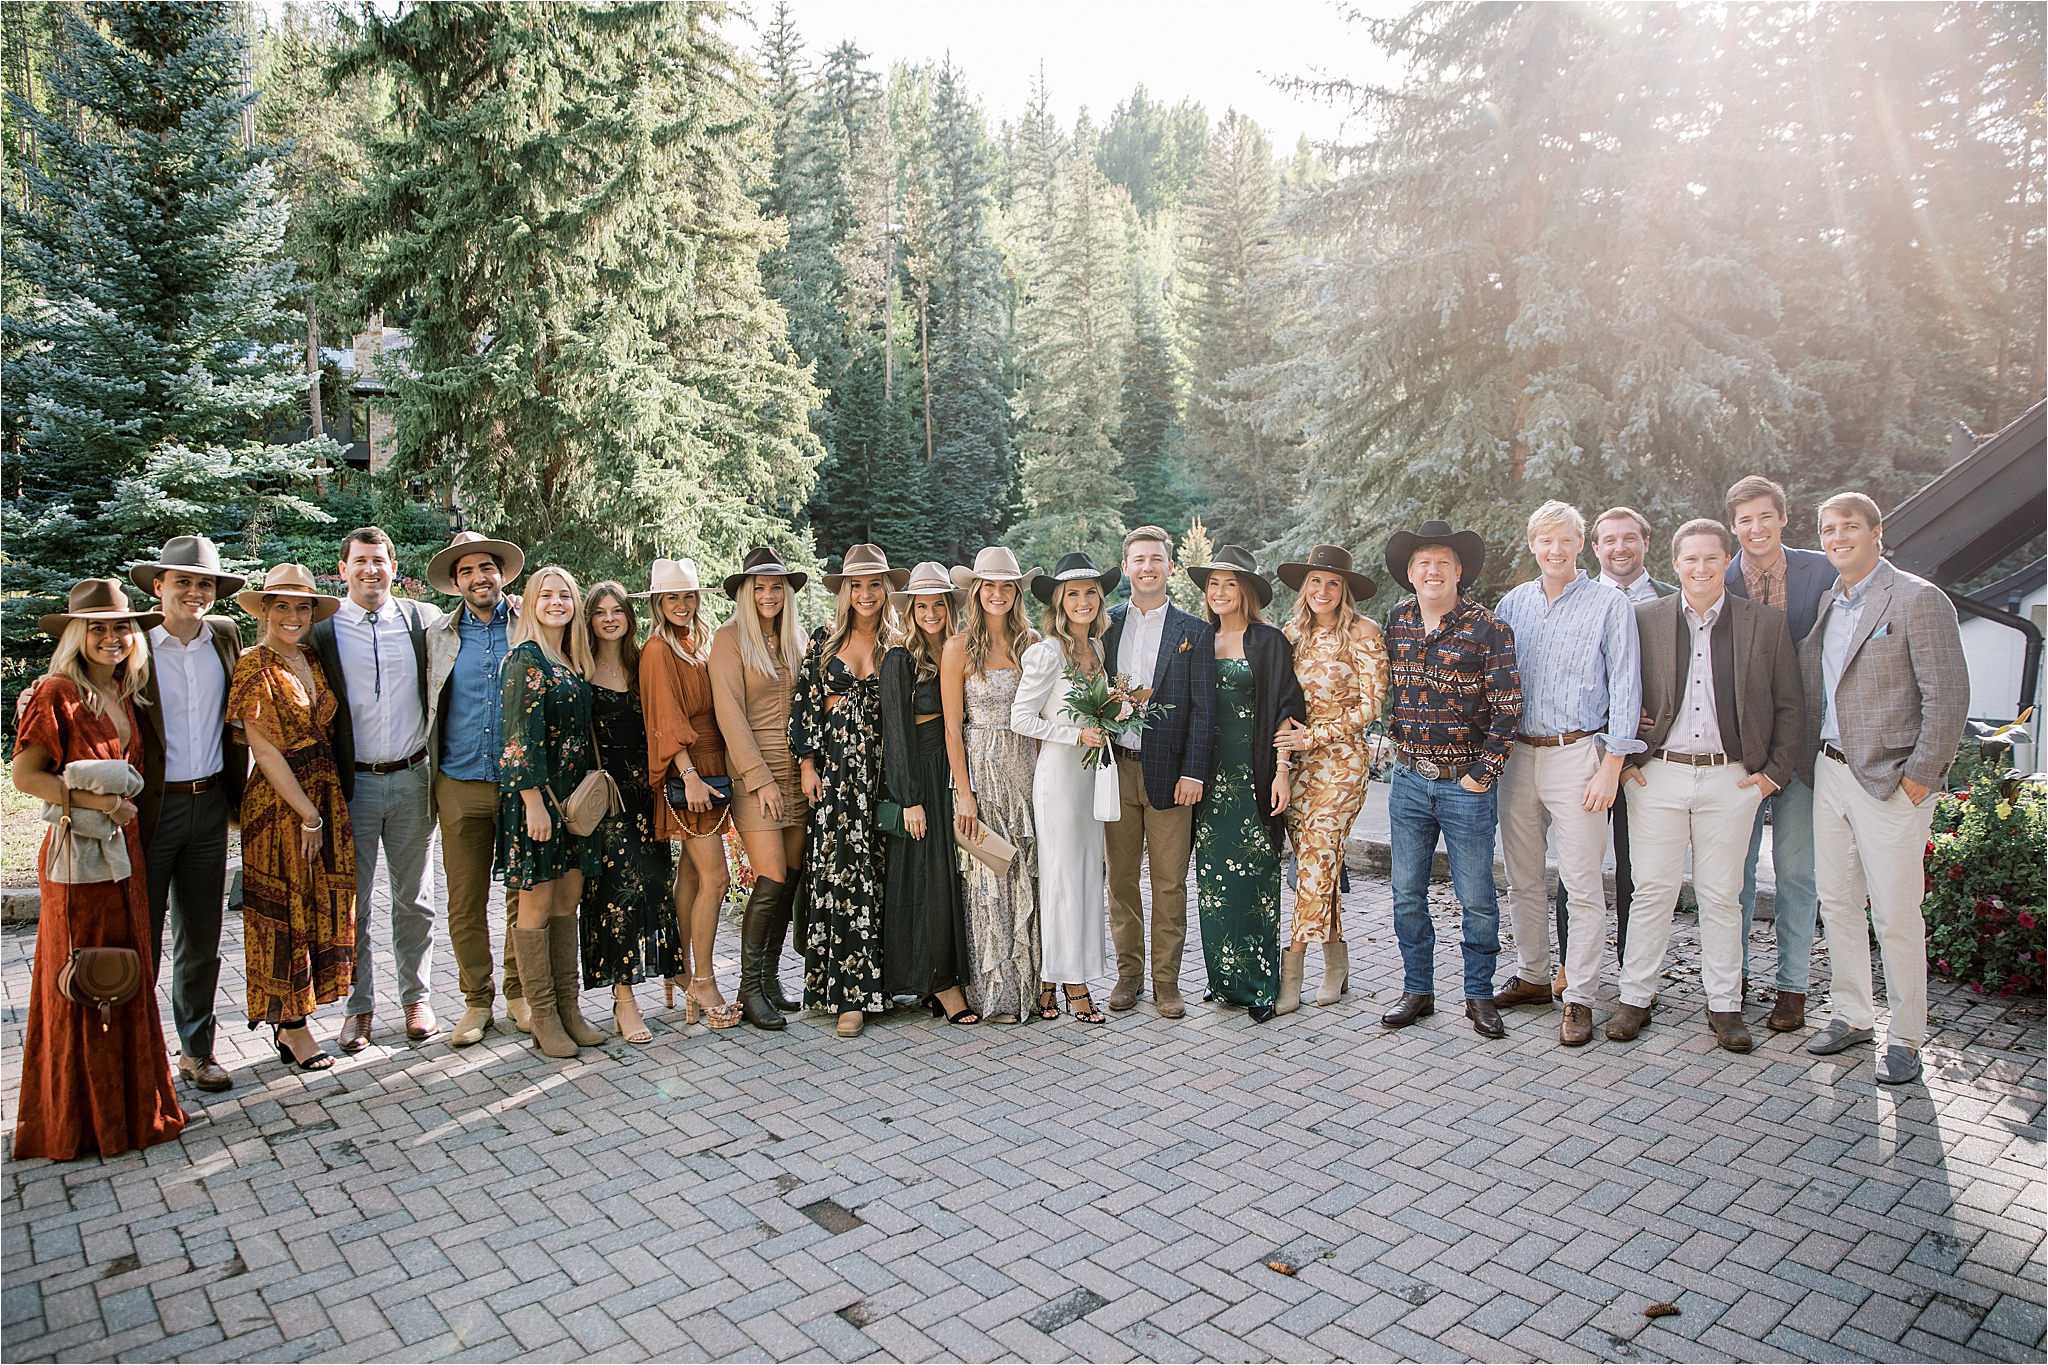 Vail Wedding, Four Seasons Vail Wedding, Charleston Couple, The Slope Room, Gravity Haus, Vail Interfaith Chapel, Kemosabe Wedding, Kemosabe Hats on Bridal Party, Western Chic Themed Welcome Party, Colorado Western Chic, Rehearsal dinner, Western wedding